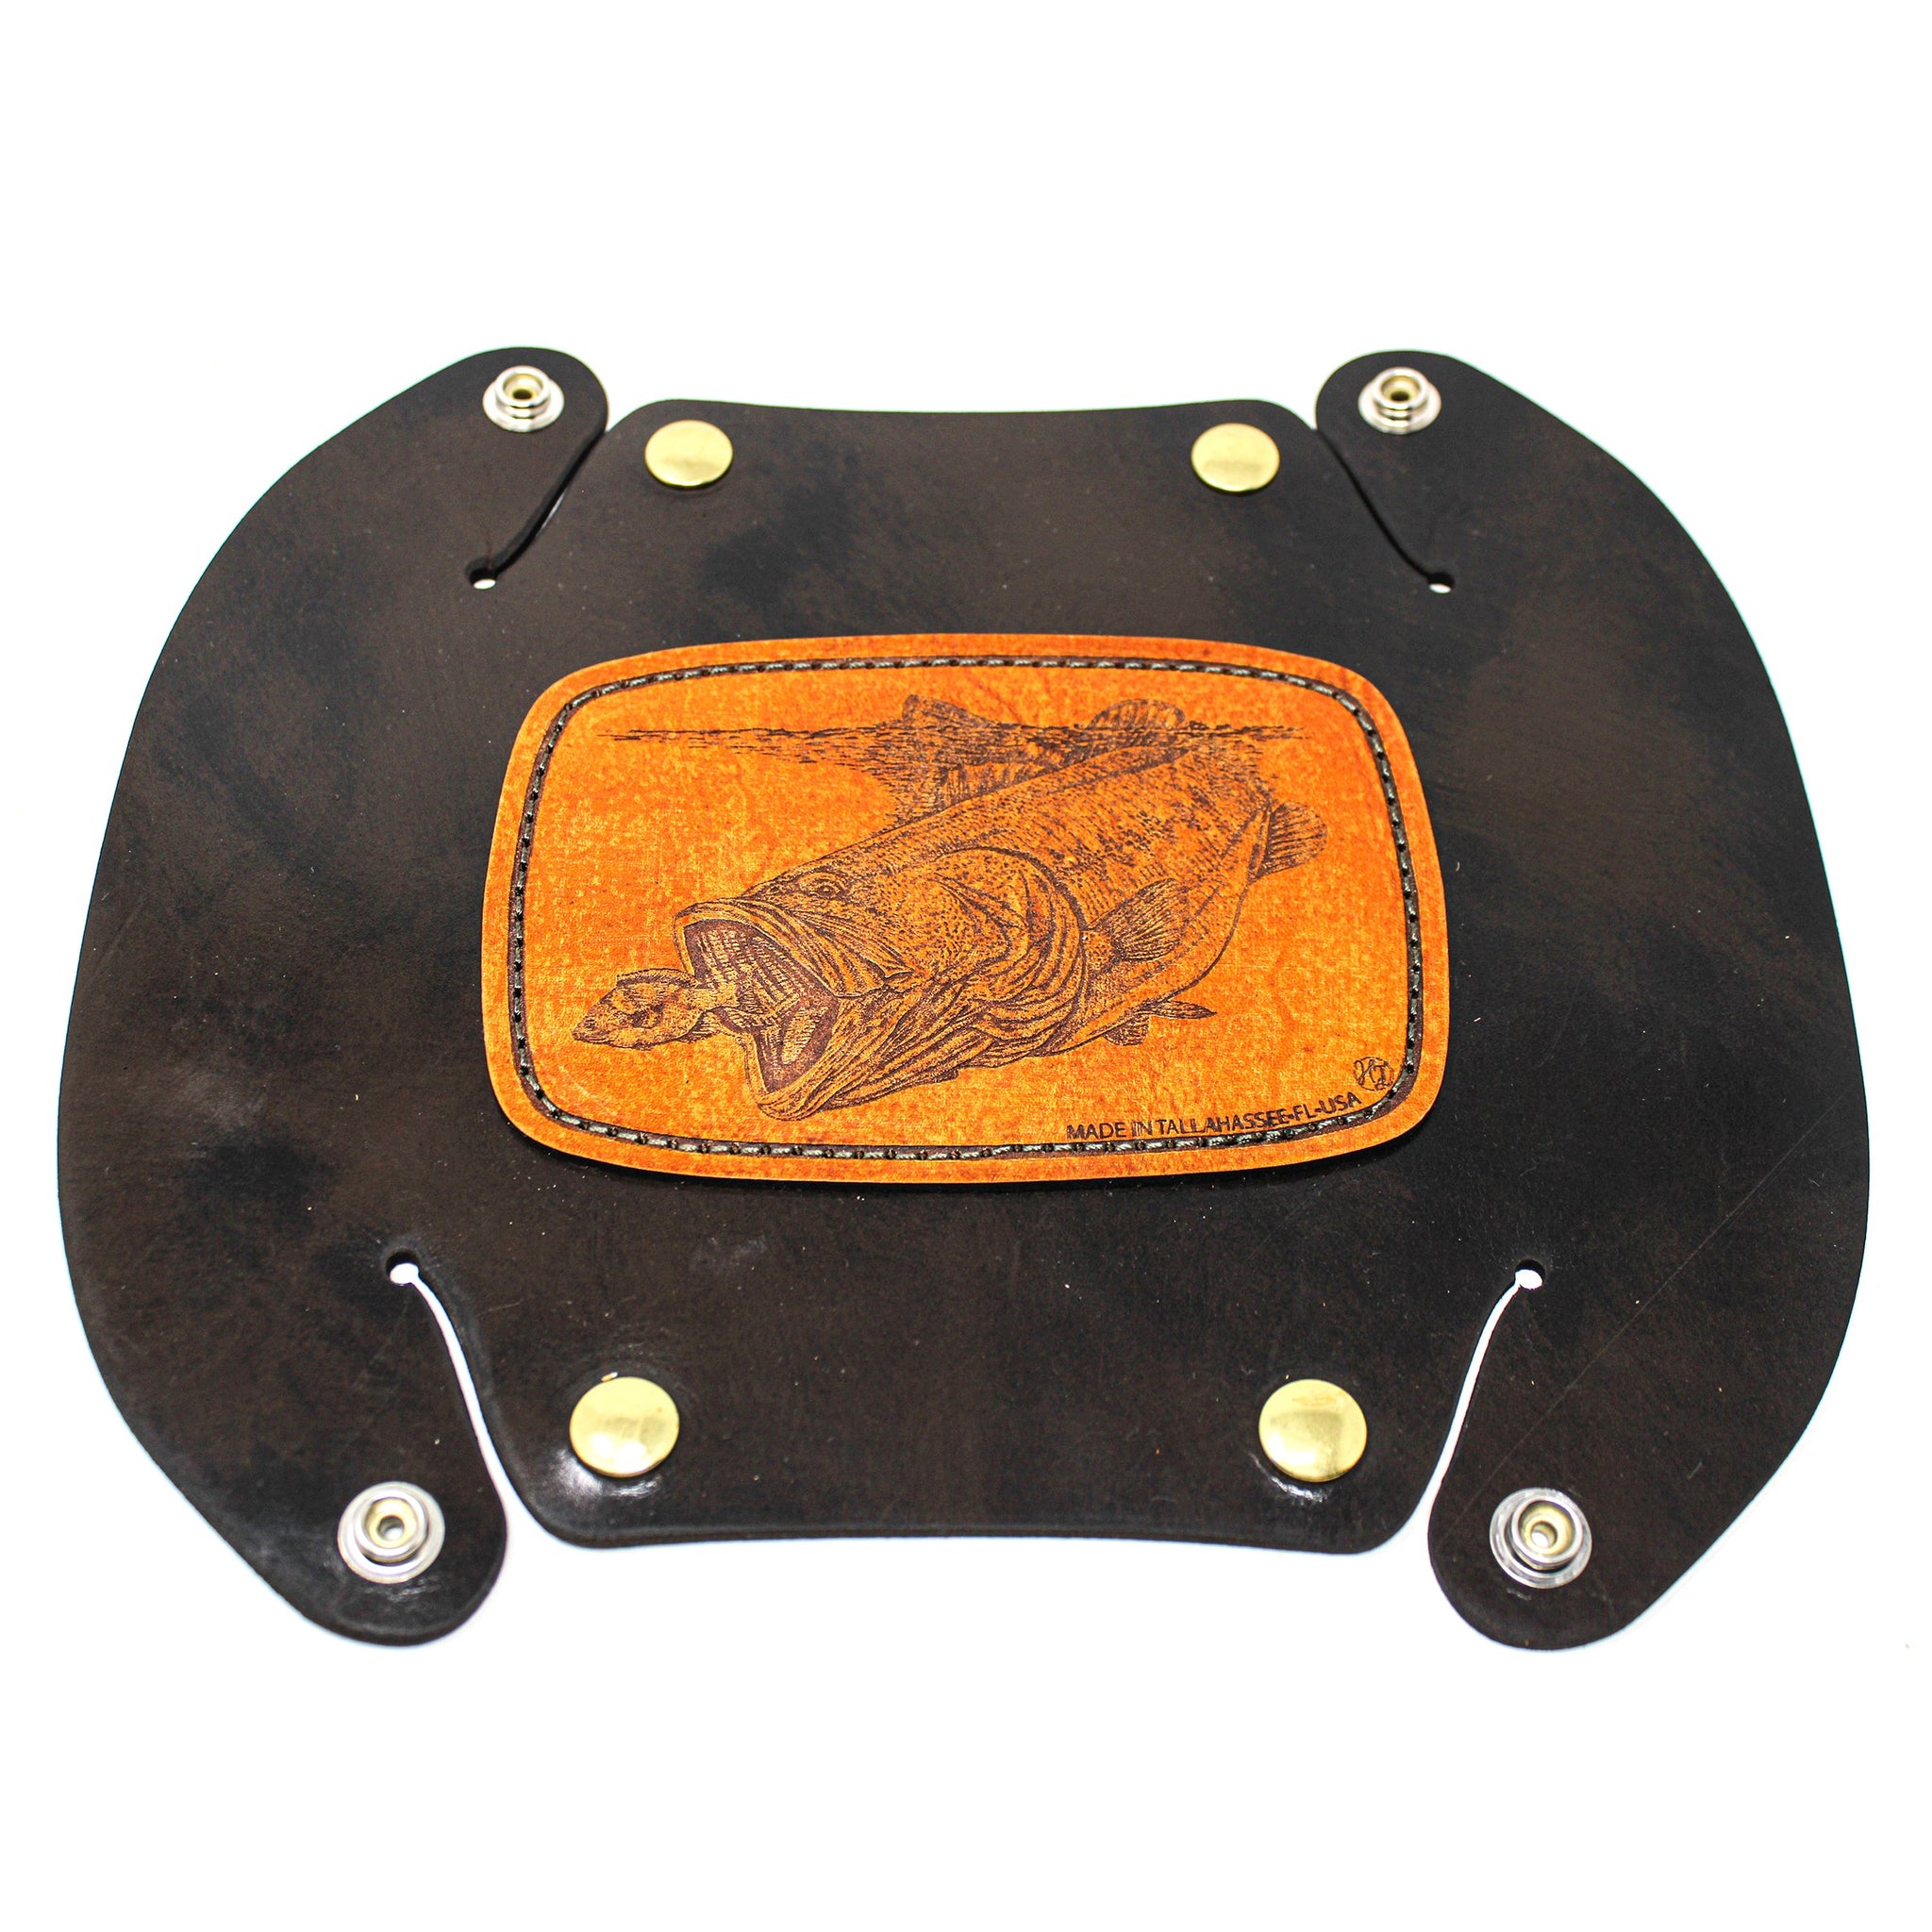 Leather Valet Tray - Large mouth bass - Get it